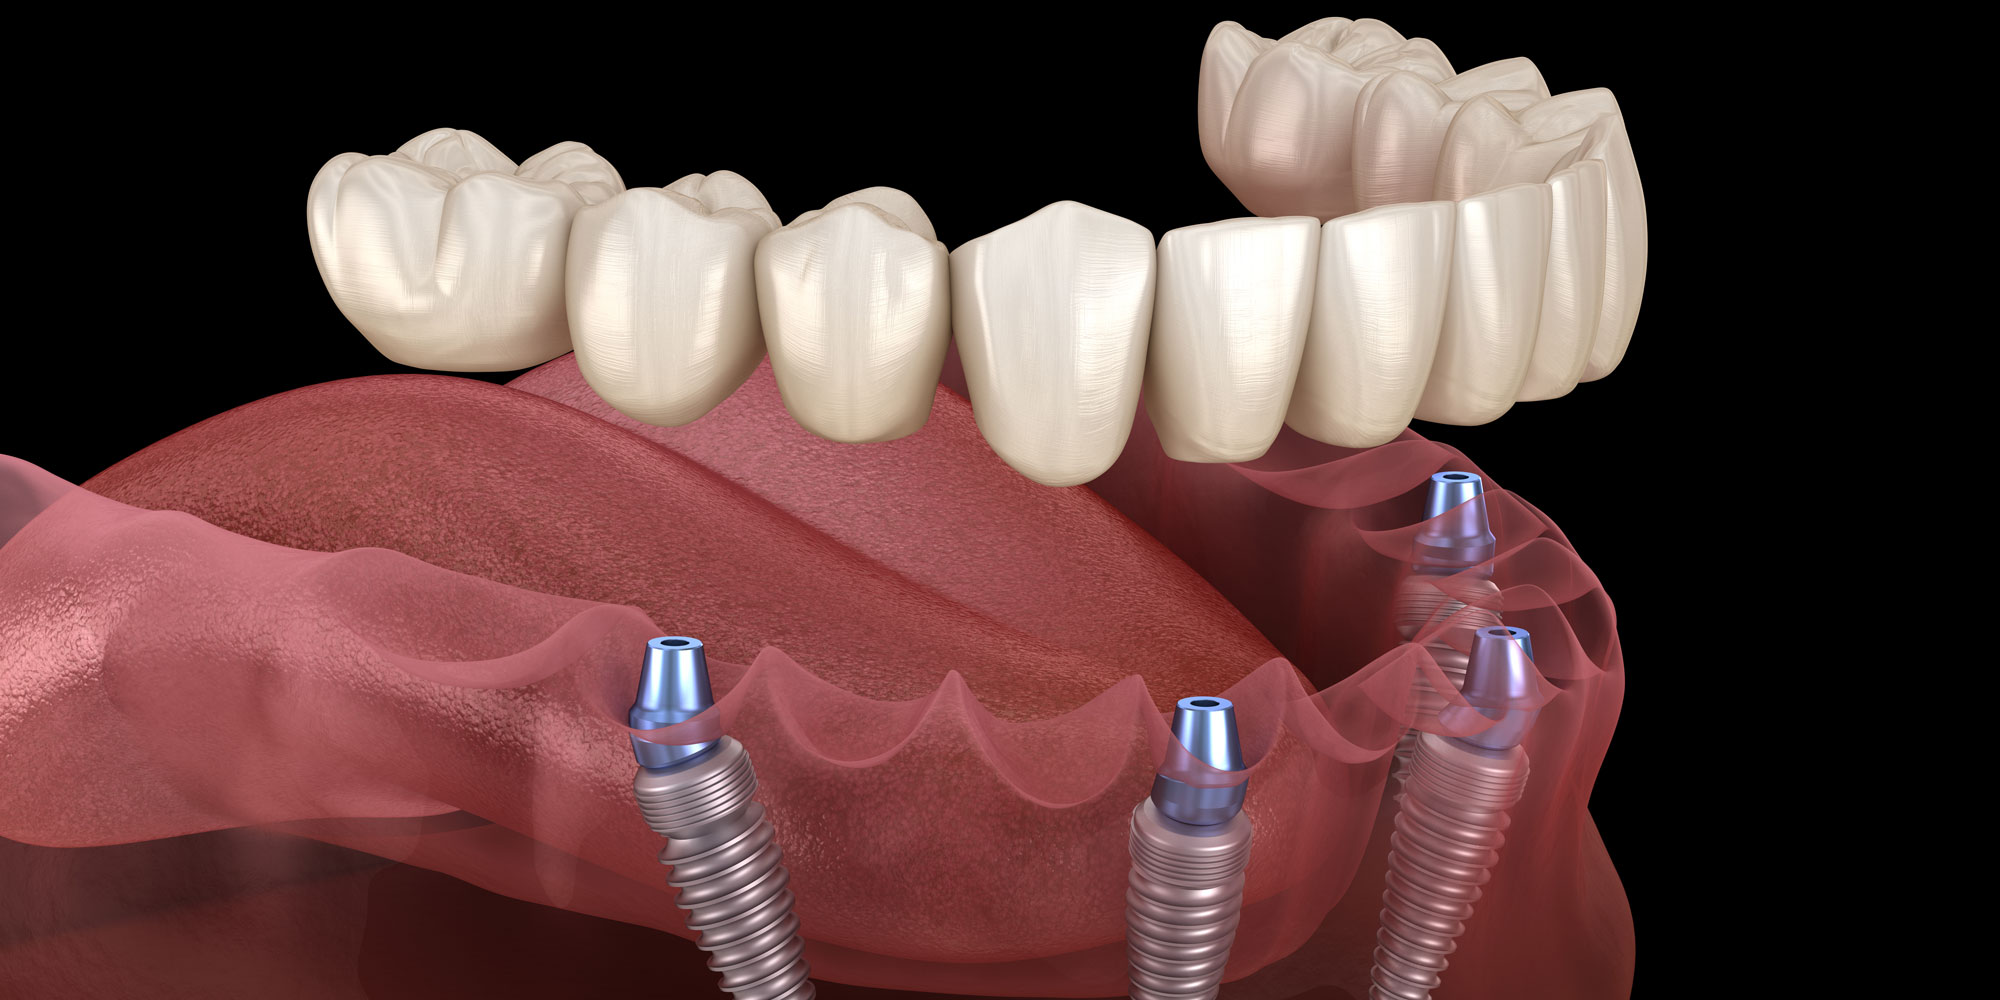 Full Mouth Dental Implants | Campbell, CA | Replace A Full Arch